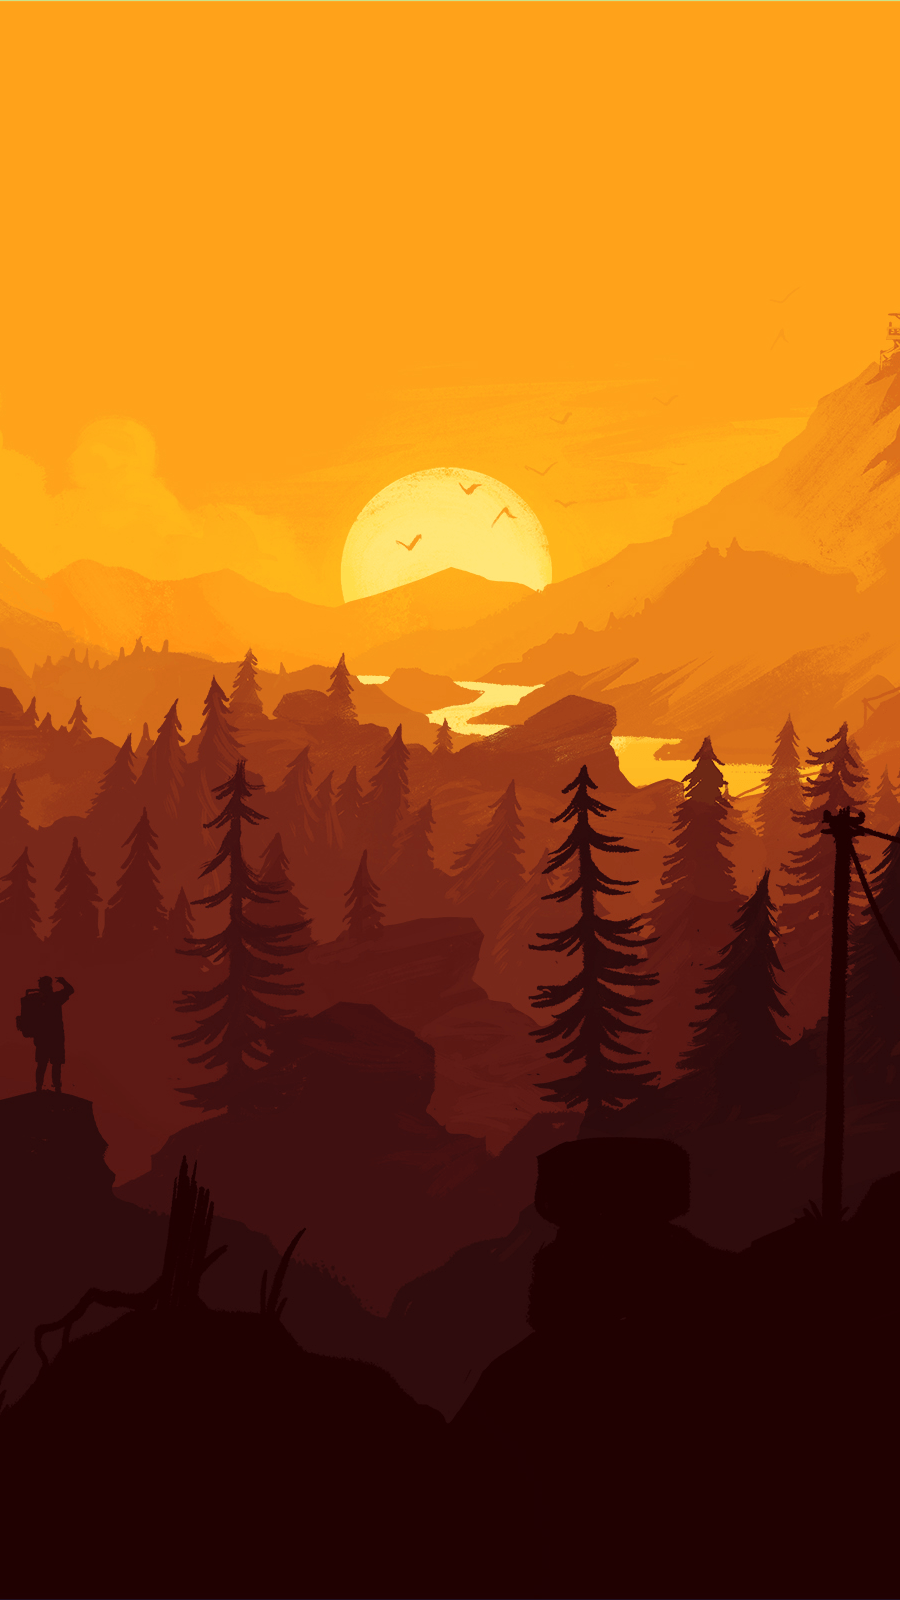 I Made A Firewatch Theme For My Mobile, With Wallpaper That Changes To Reflect The Time Of Day (tutorial Inside) [x Post R Androidthemes]: Firewatch